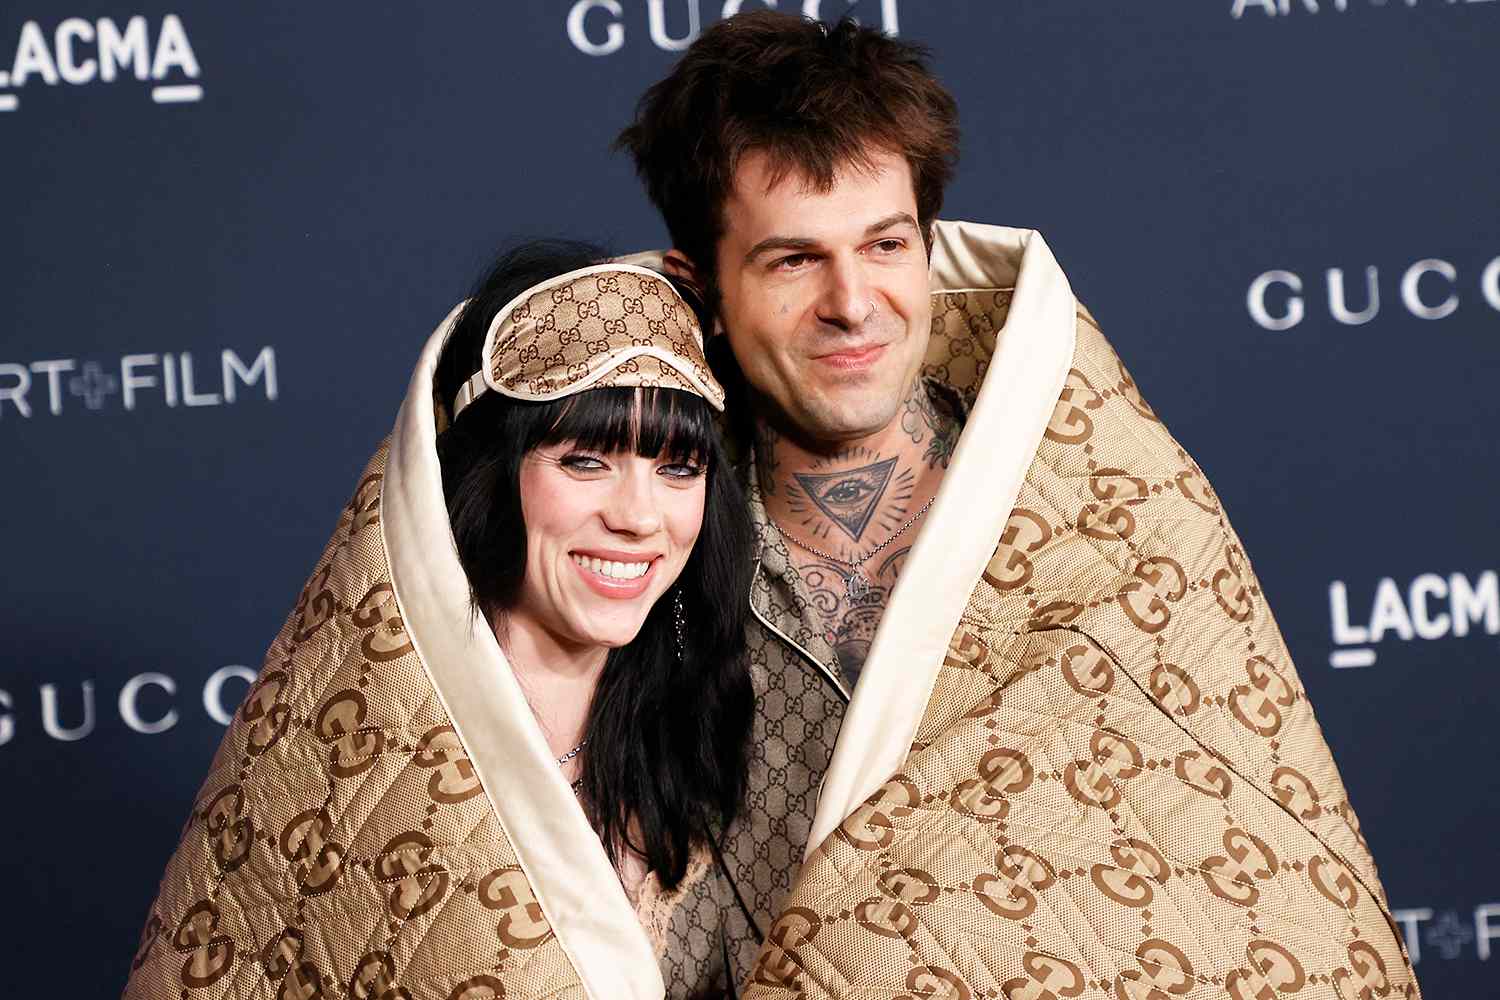 Billie Eilish Calls Ex Jesse Rutherford 'One of My Favorite People,' Jokes She's 'Never Dating Again'